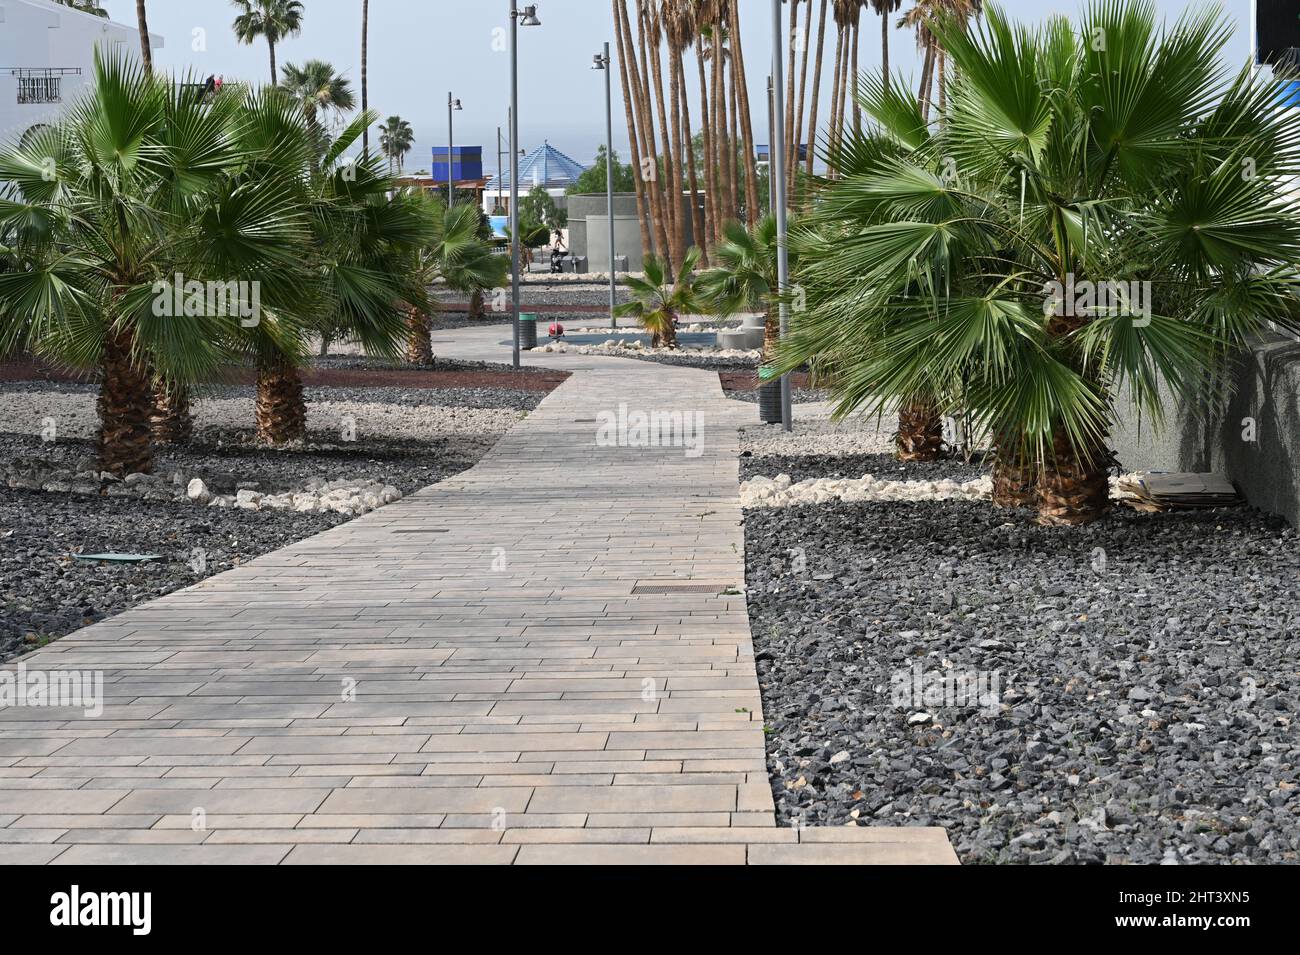 A walkway of stone blocks encased with volcanic rock and palm trees through Costa Adeje on the Island of Tenerife Stock Photo